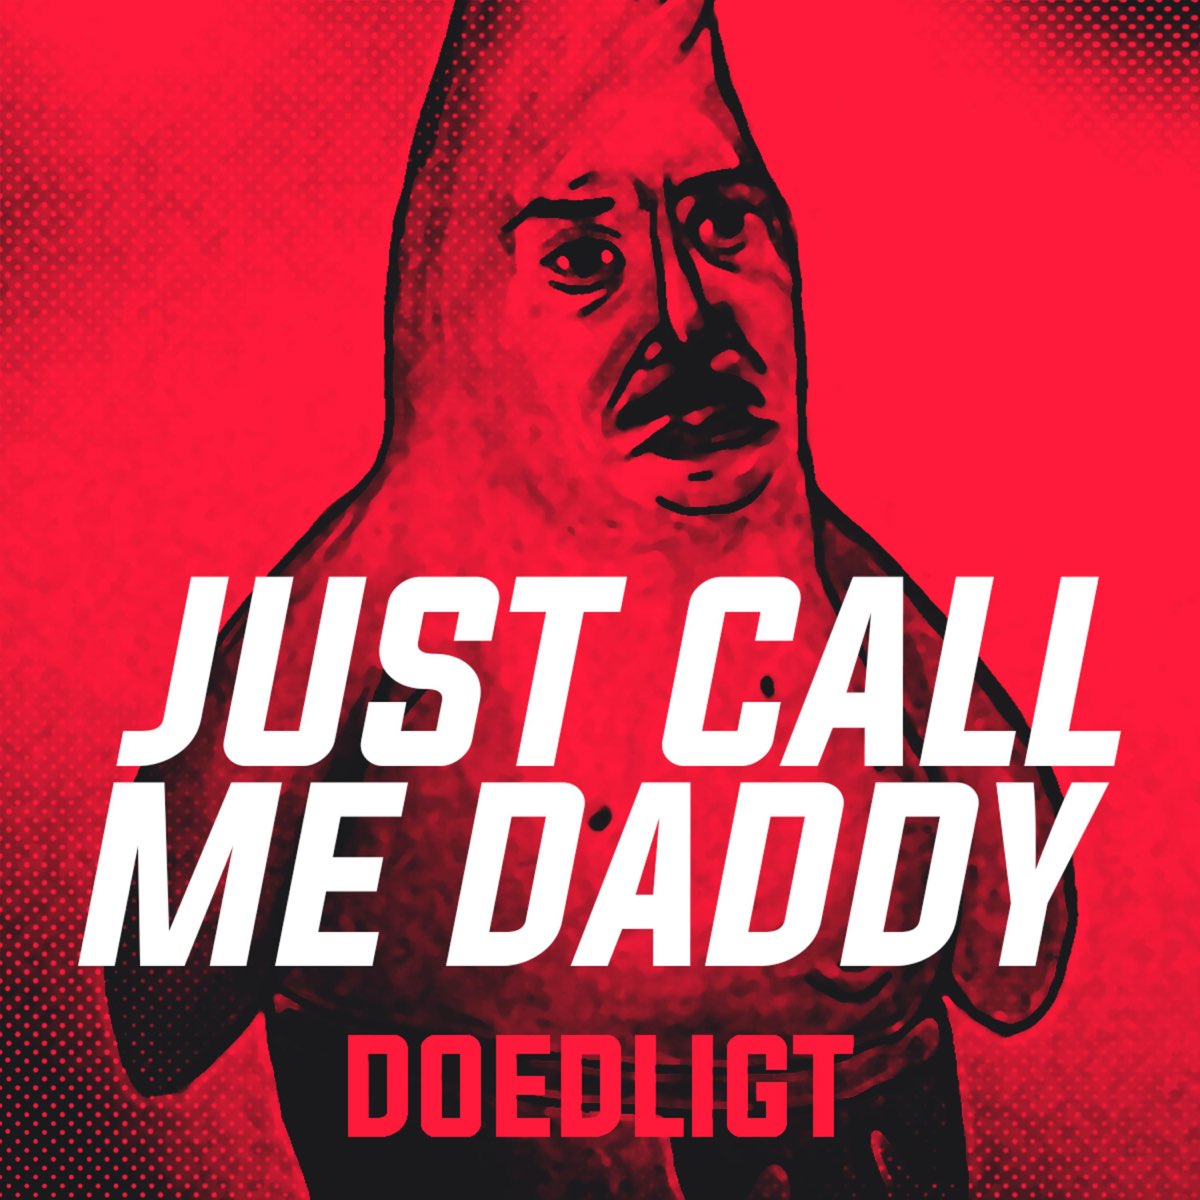 Call her daddy. Call me Daddy. Just Call me. Just Call. Офые сфдд ьу.